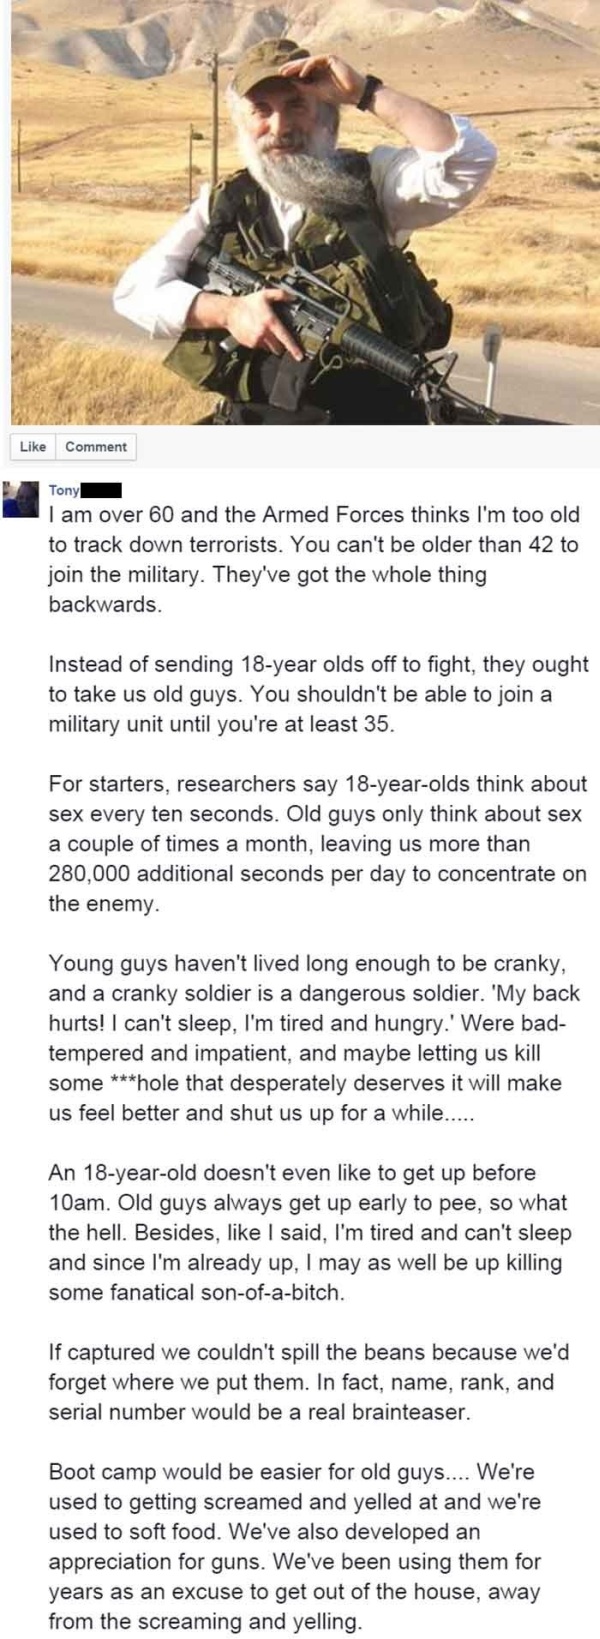 Senior Citizen On Why Old People Should Be Allowed To Join The Army